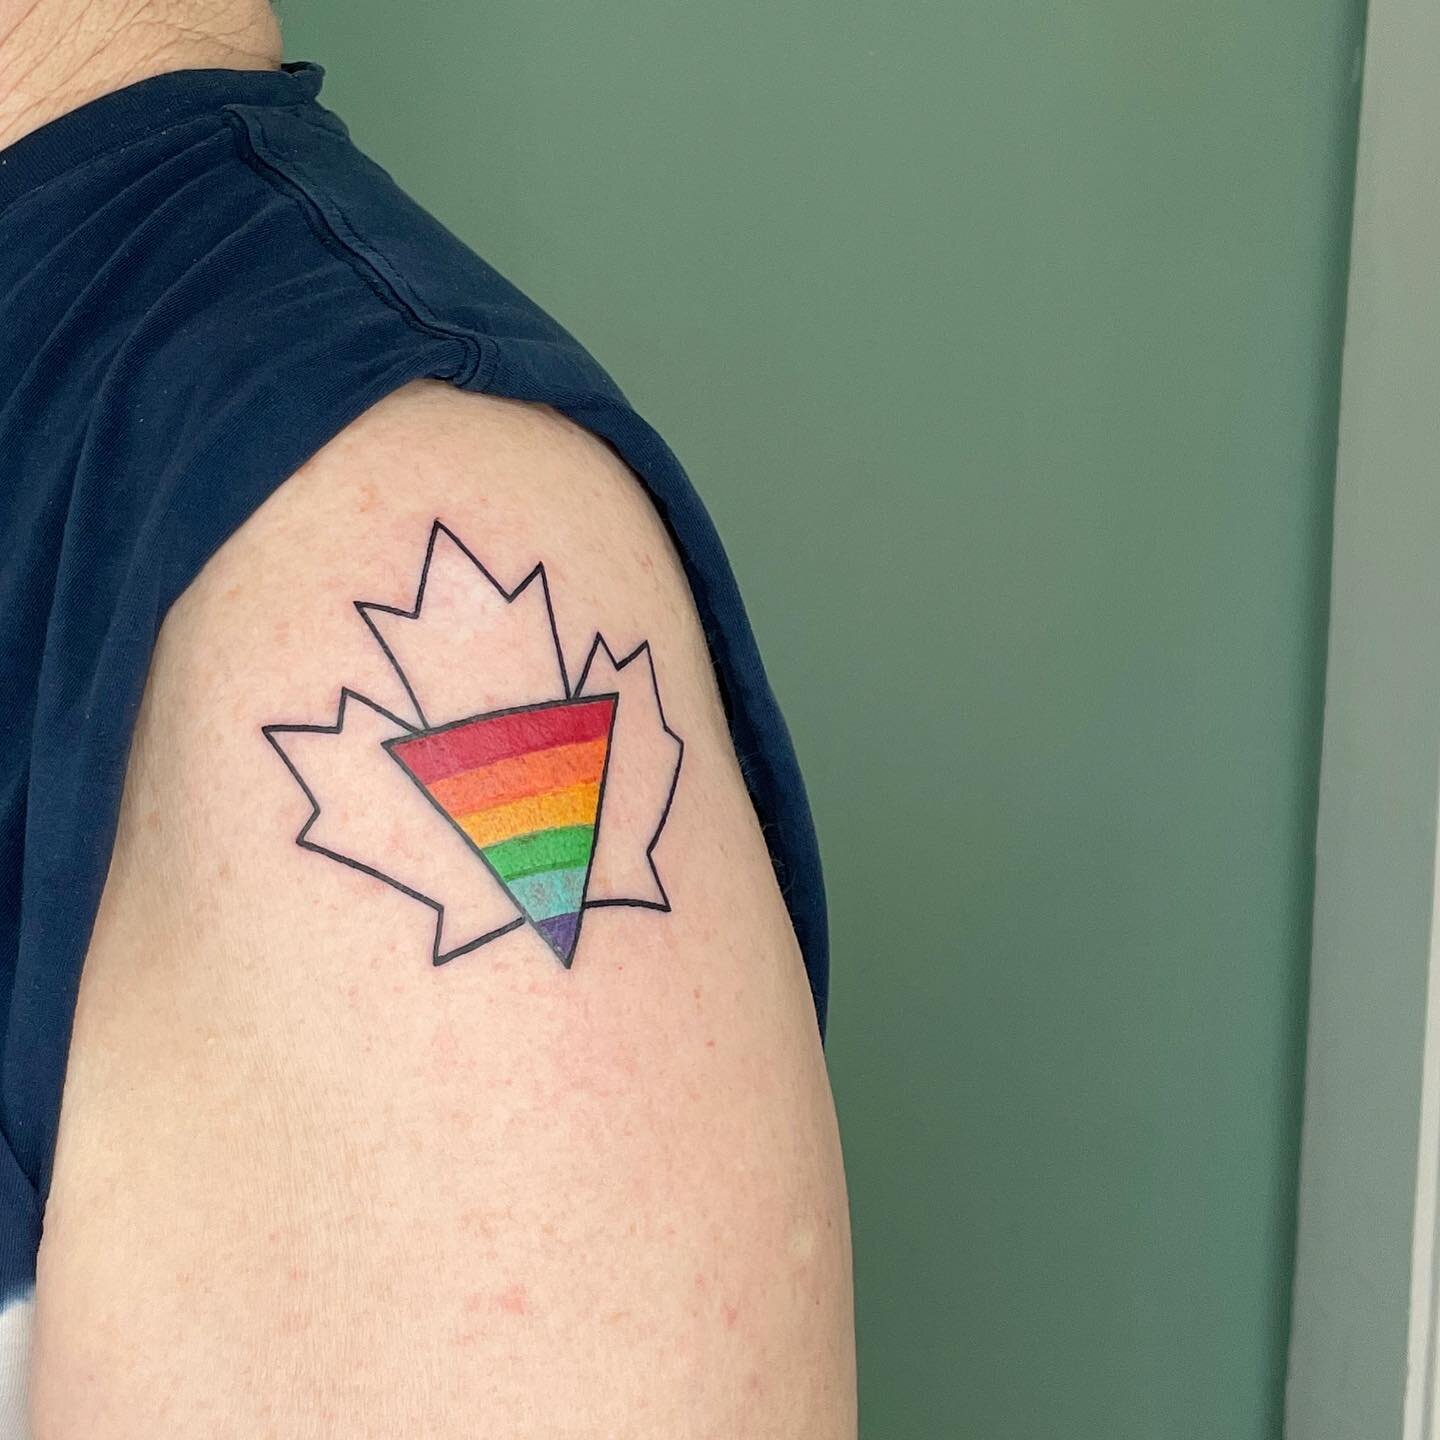 Canada 🍁 🌈 
。
Thank you for the trust!
。
Calgary 🇨🇦 Booking Open
。
Pick yours or dm to customize your own tattoo💫
。
Creation has NOTHING to do with real life event or designs.
。
DM for more details about this tattoo.
。
Like and share if you like